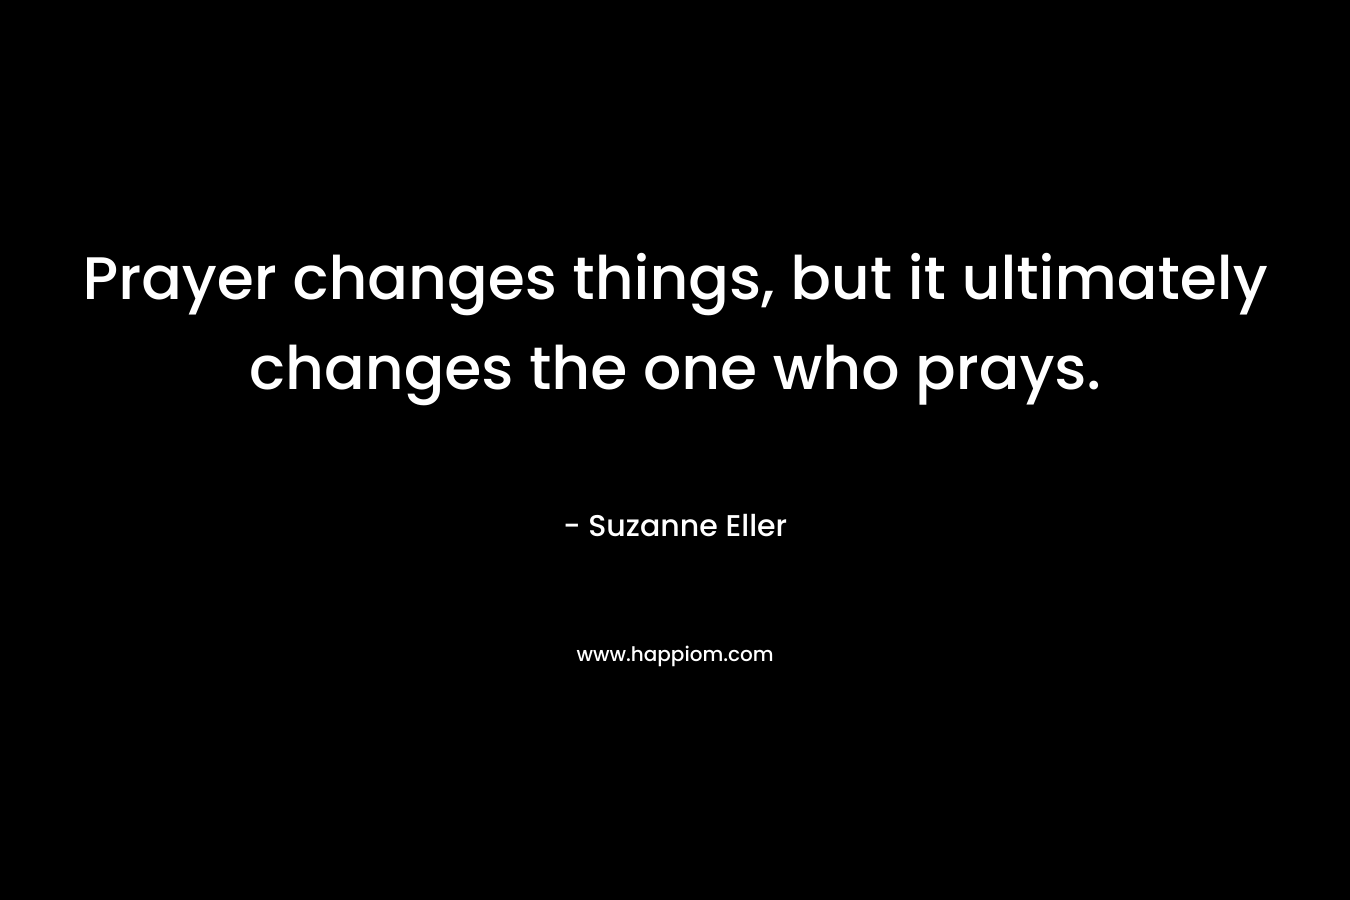 Prayer changes things, but it ultimately changes the one who prays.